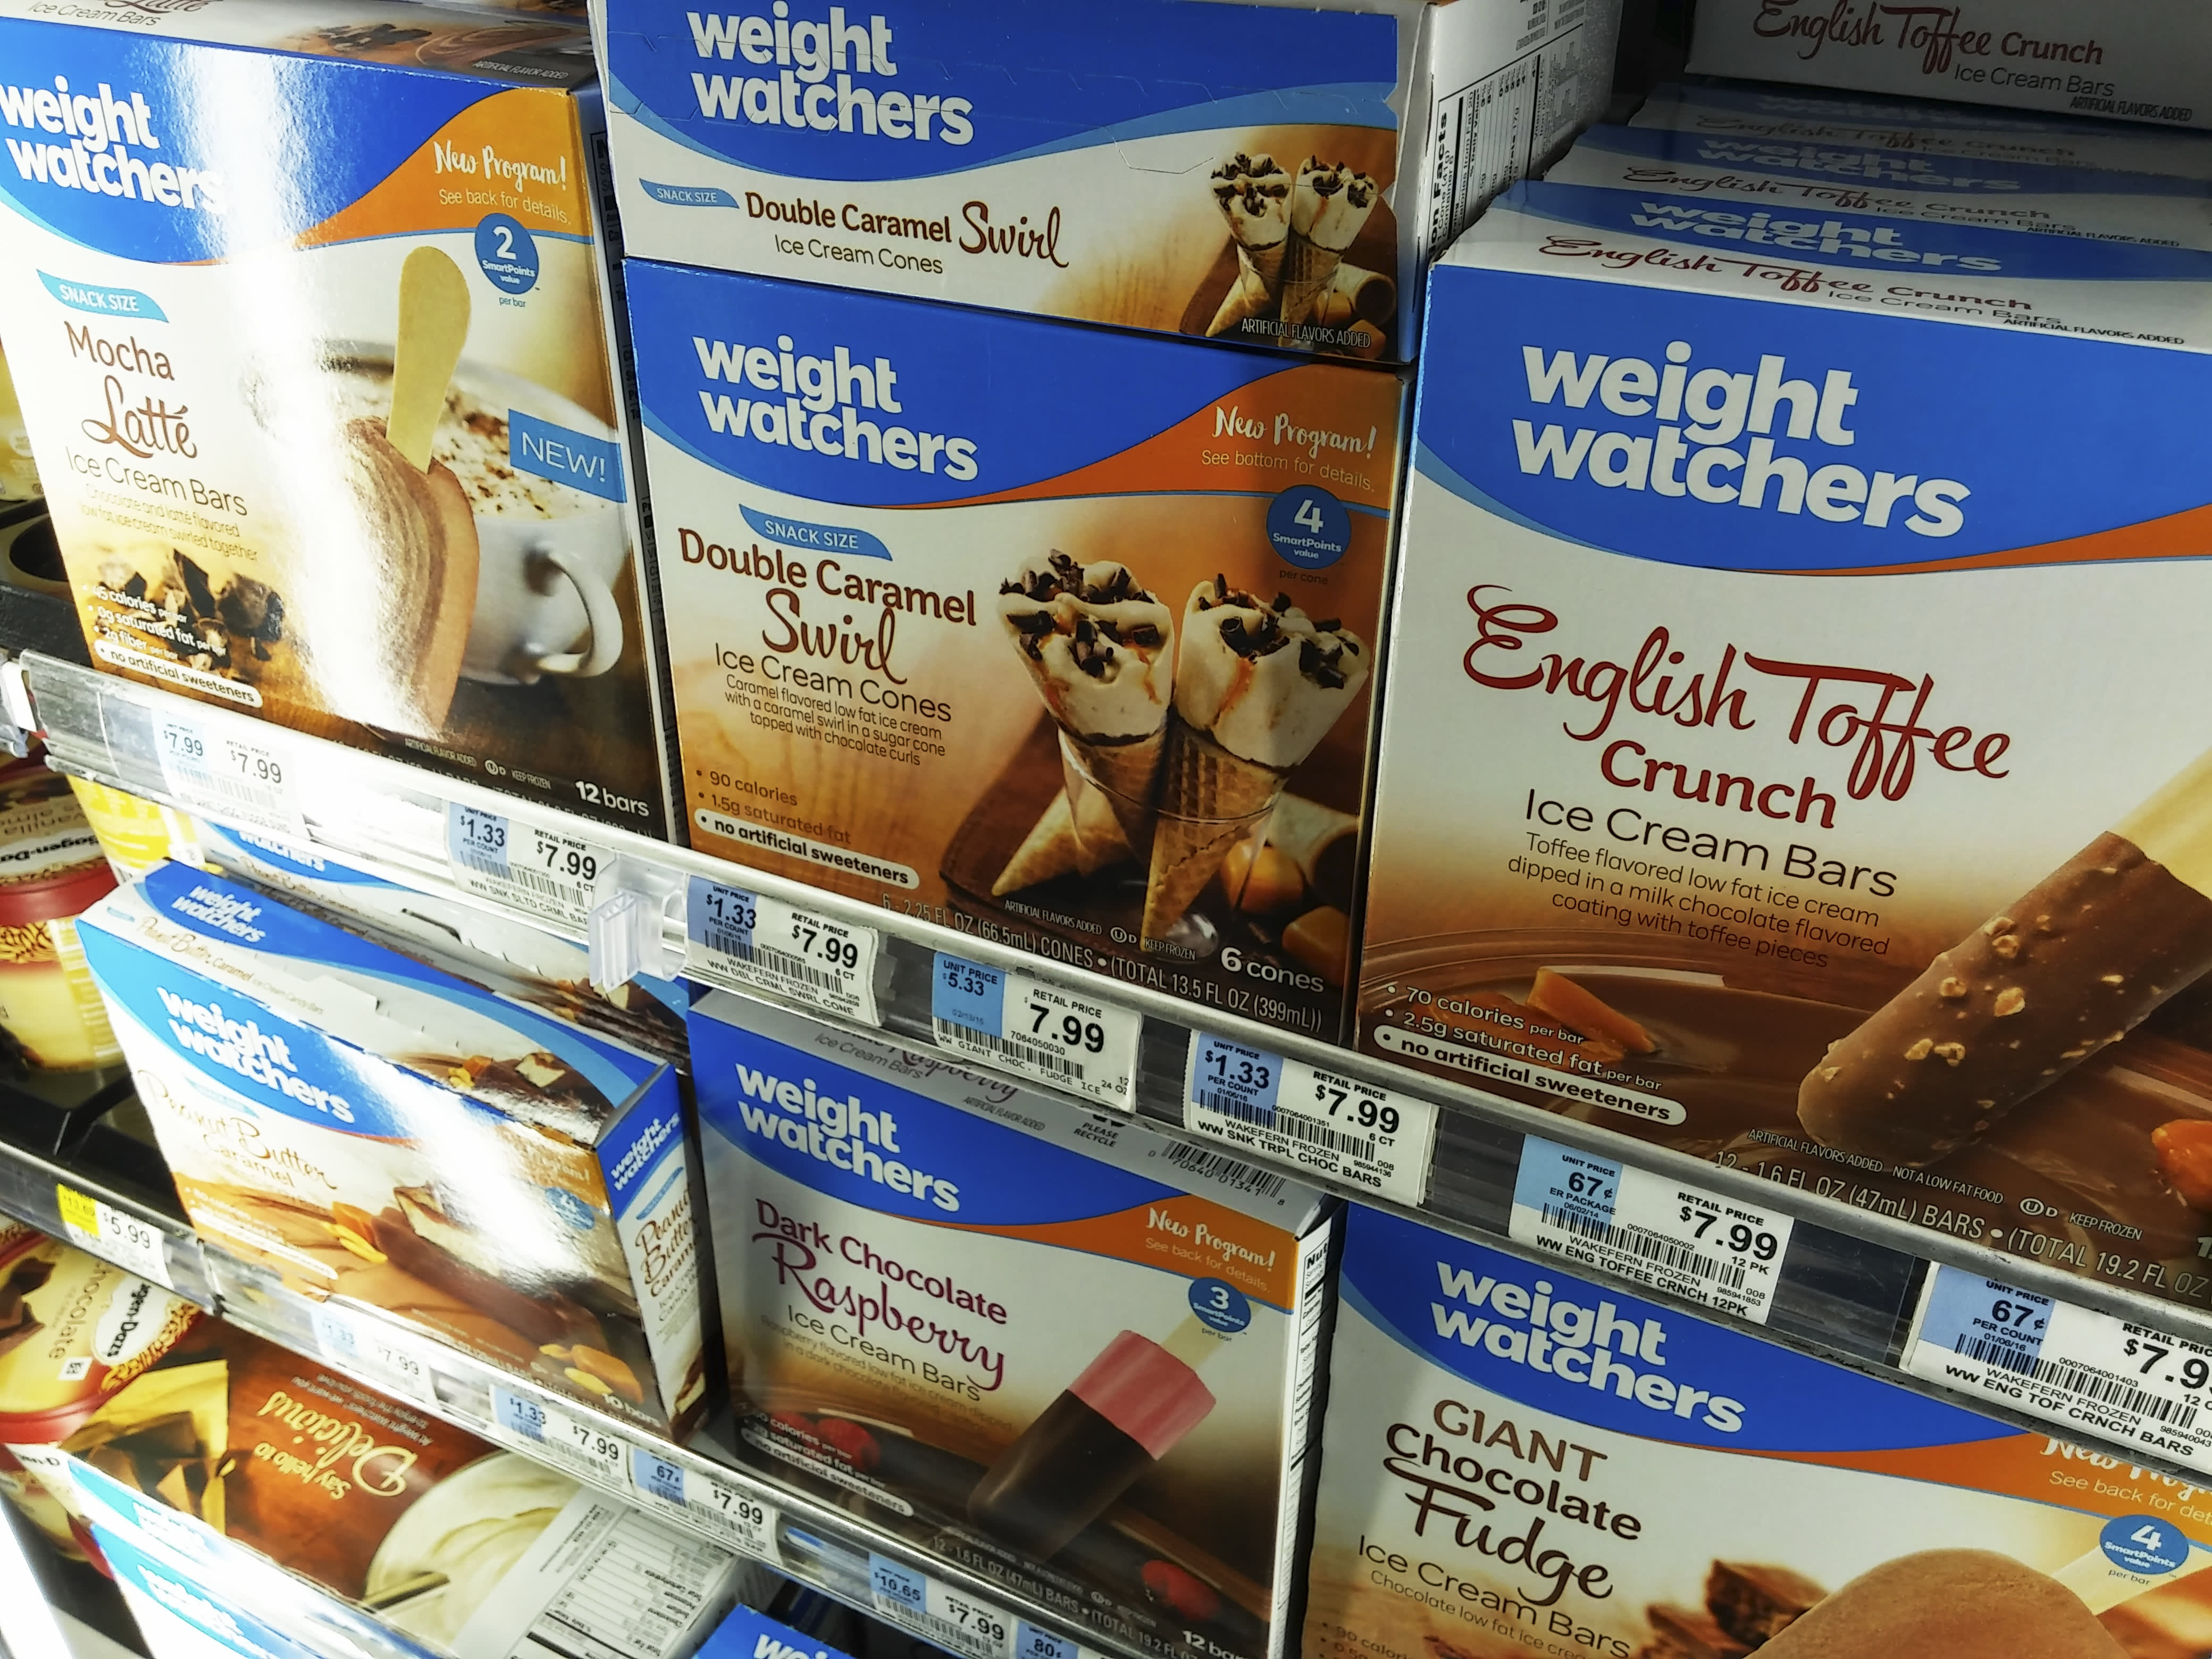 WeightWatcher’s shares rise after Sequence deal